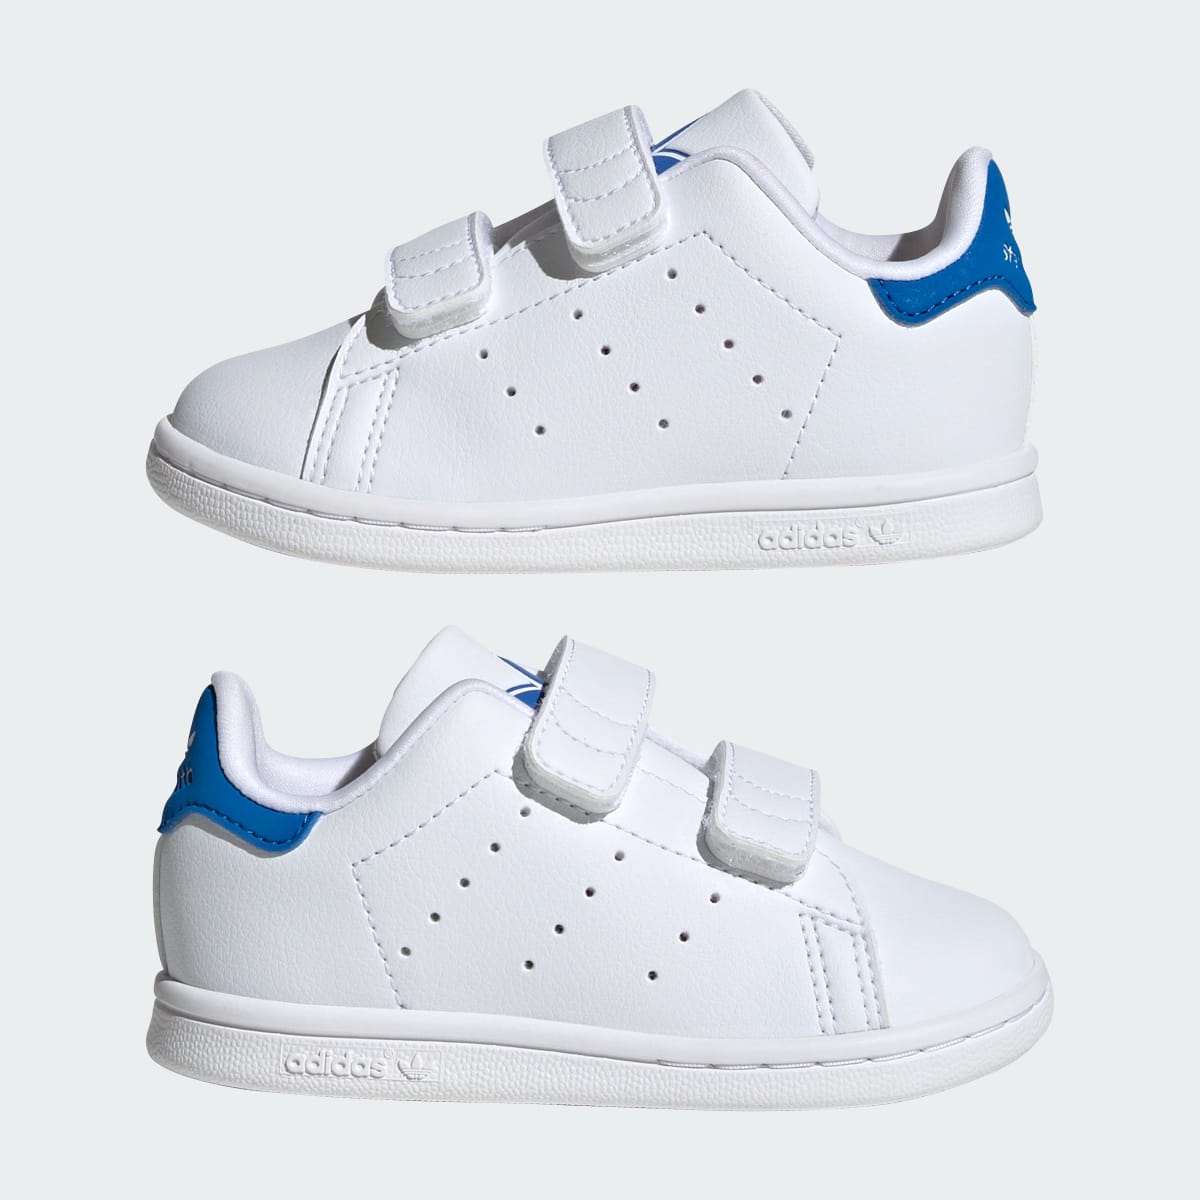 Adidas Stan Smith Comfort Closure Shoes Kids. 8